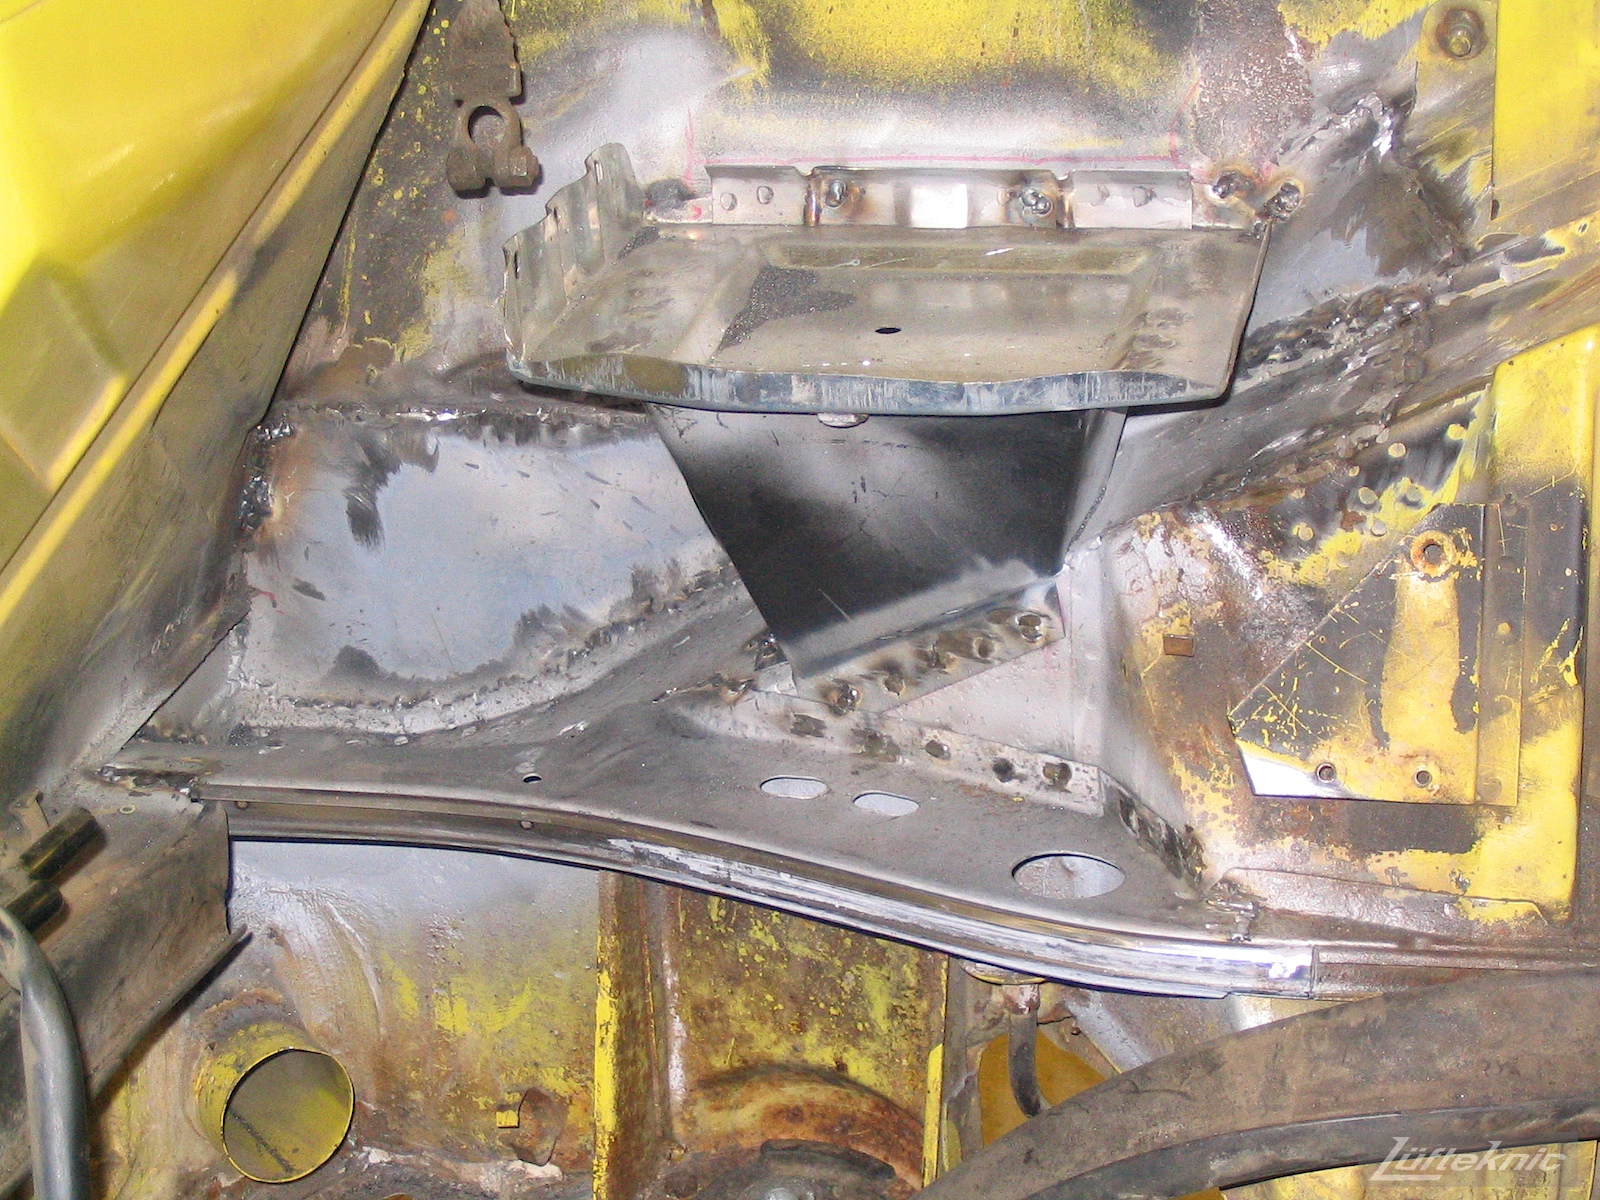 A picture showing repair of significant rust damage on the chassis of a yellow Porsche 914.